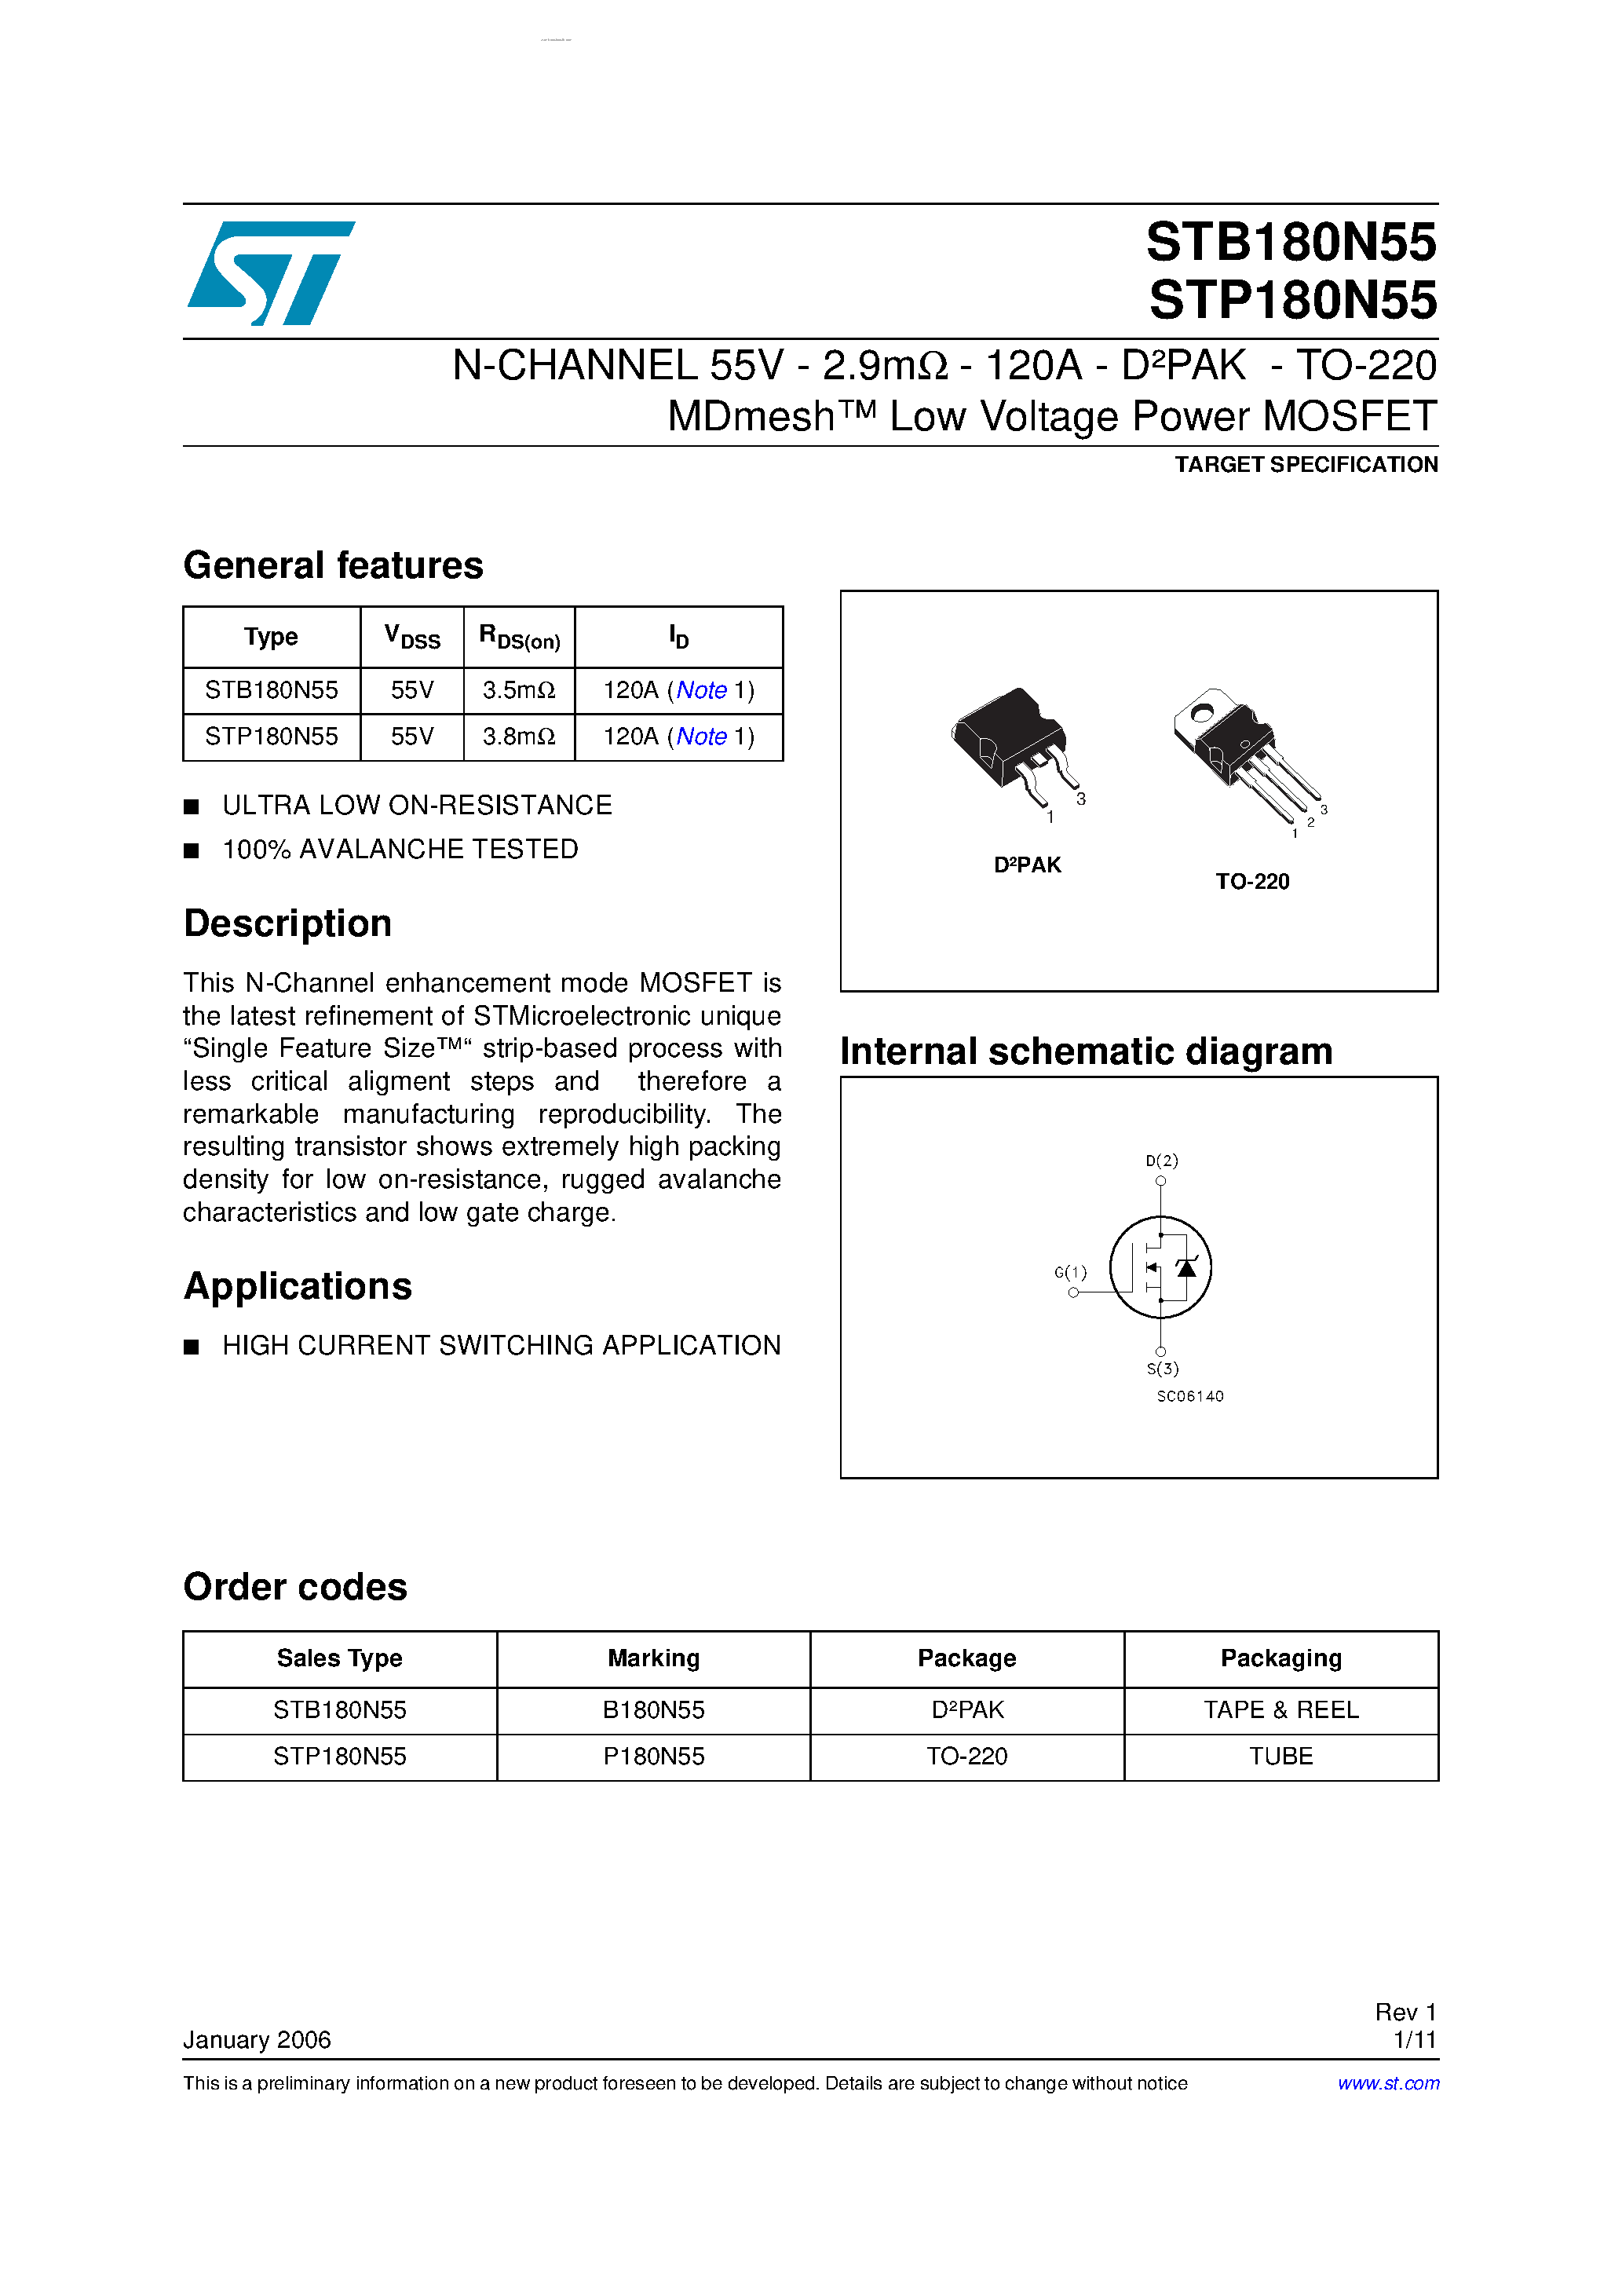 Datasheet STP180N55 - N-CHANNEL Power MOSFET page 1